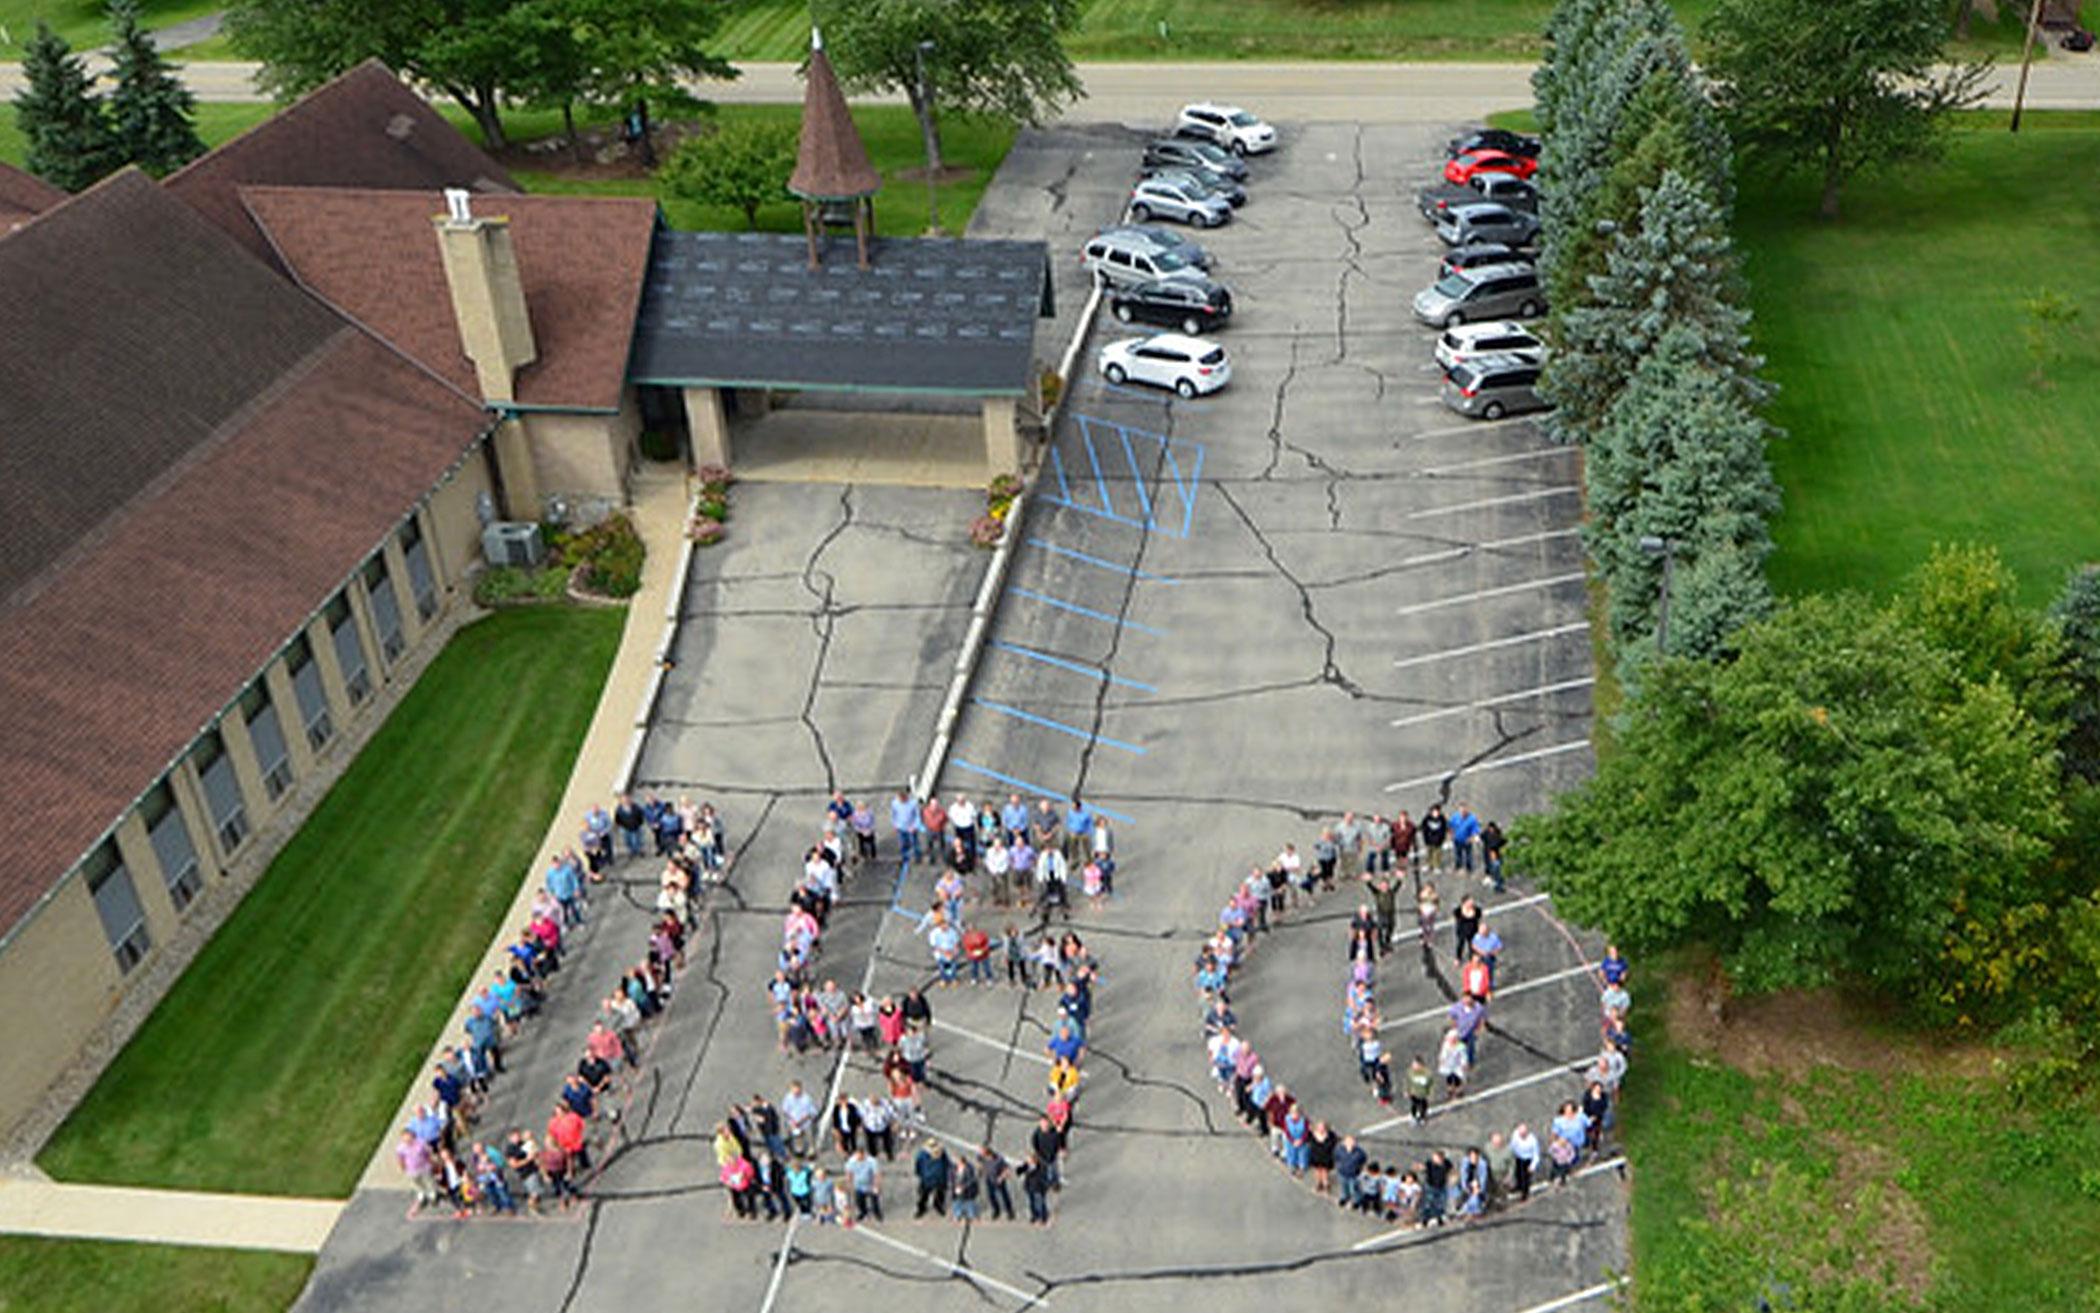 The Saugatuck Fire Department assisted in capturing an aerial photo Aug. 18, 2019, of people in formation in the parking lot of East Saugatuck CRC.